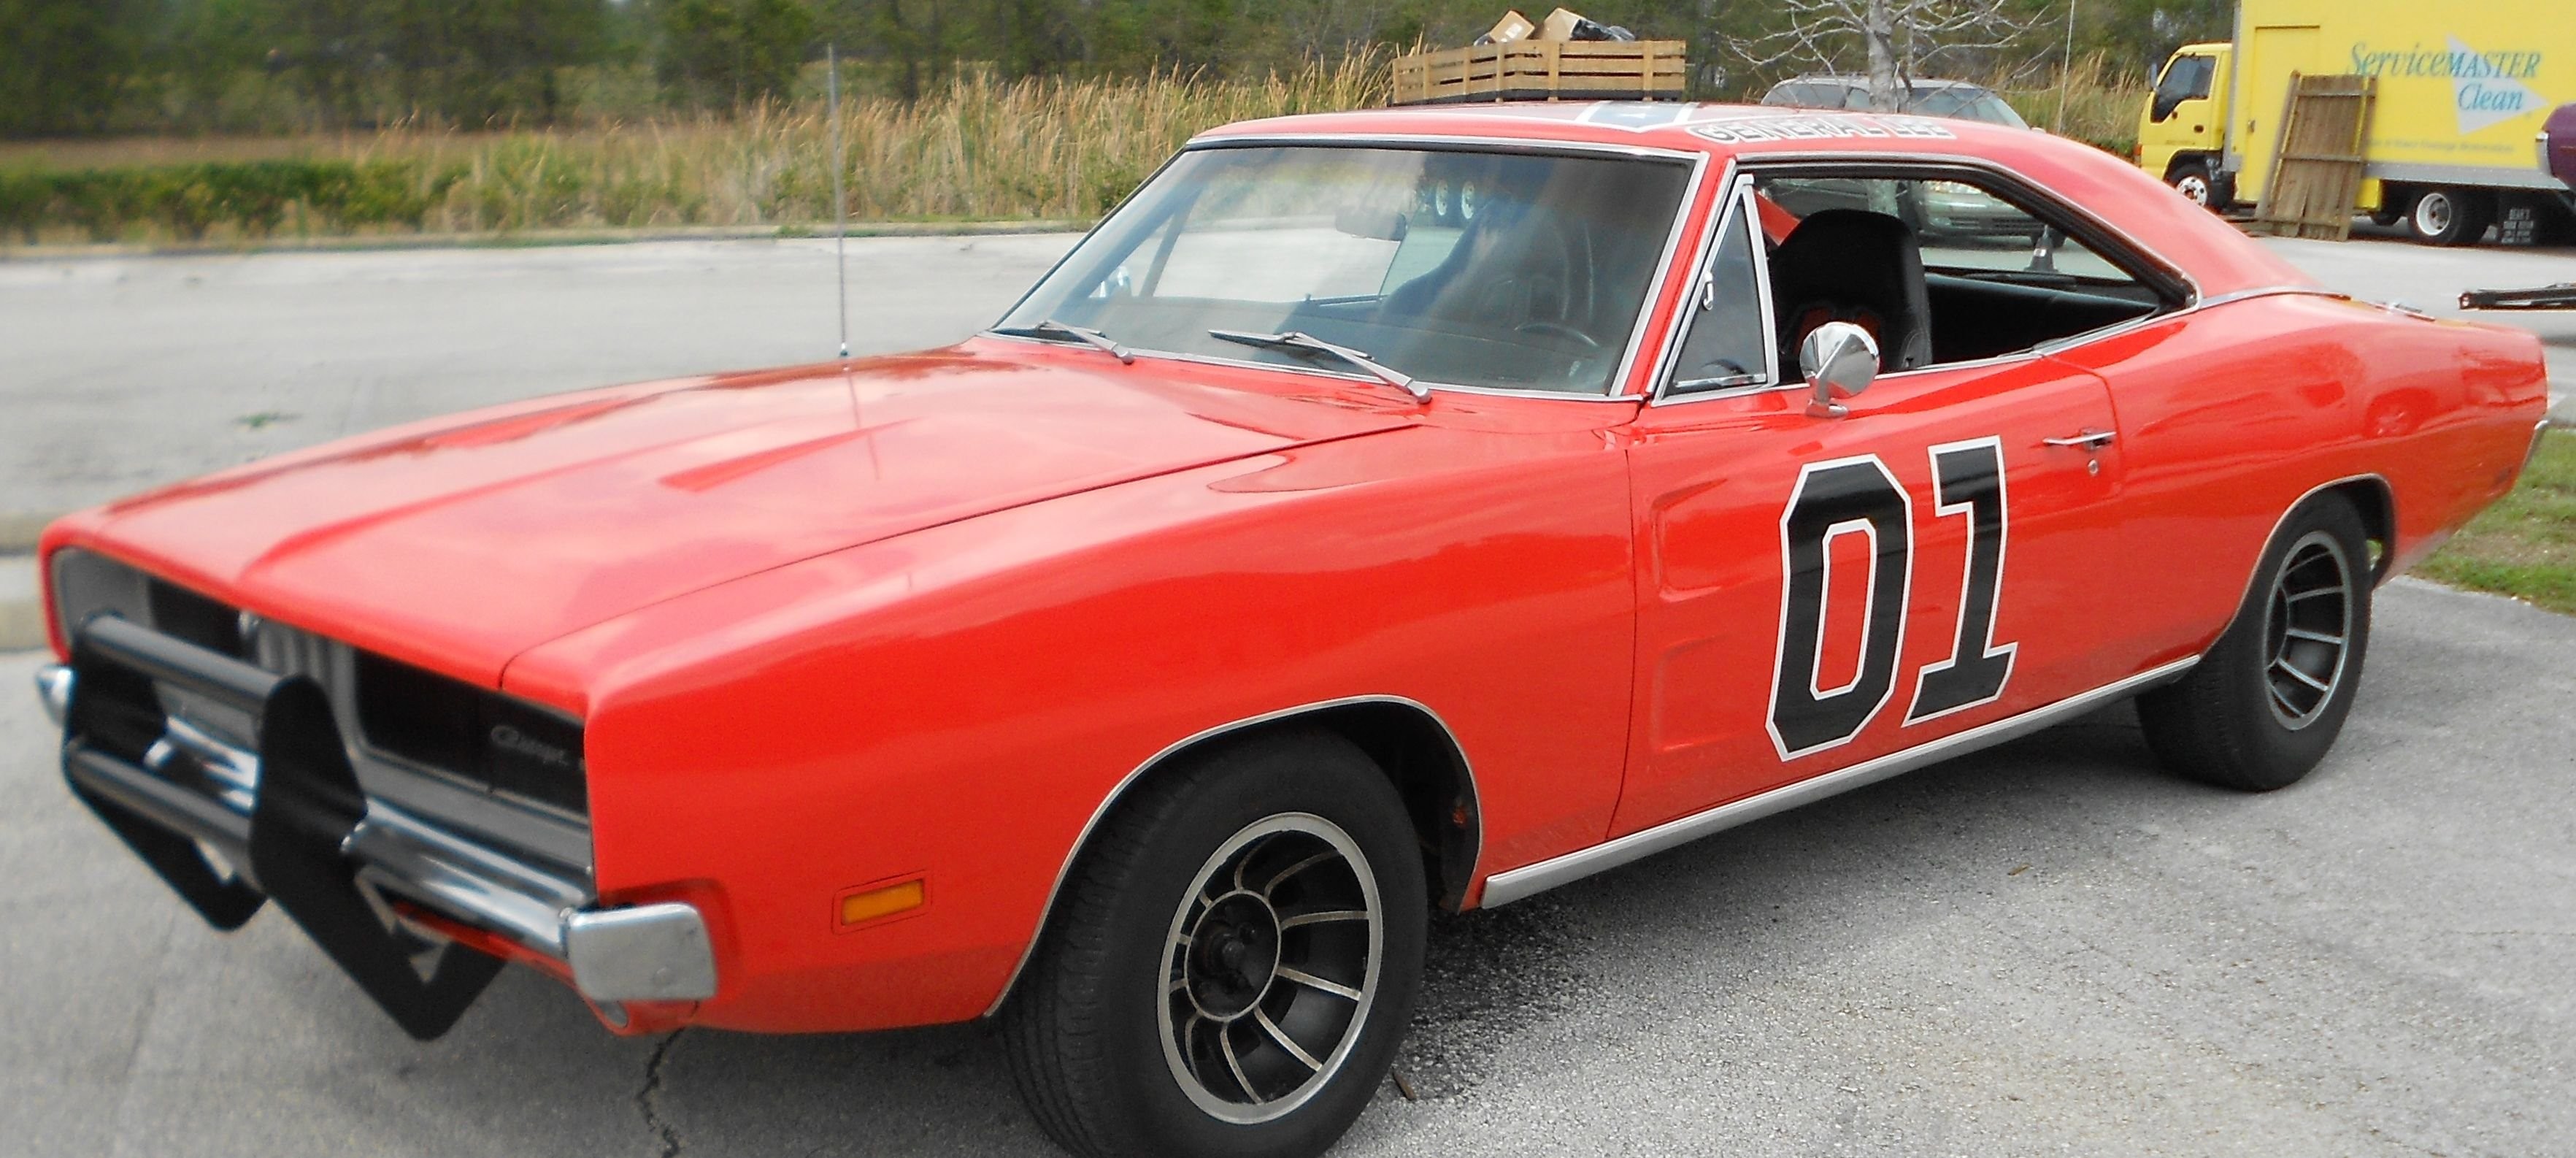 3529x1586 GENERAL LEE dukes hazzard dodge charger muscle hot rod rods television  series wallpaper |  | 289143 | WallpaperUP